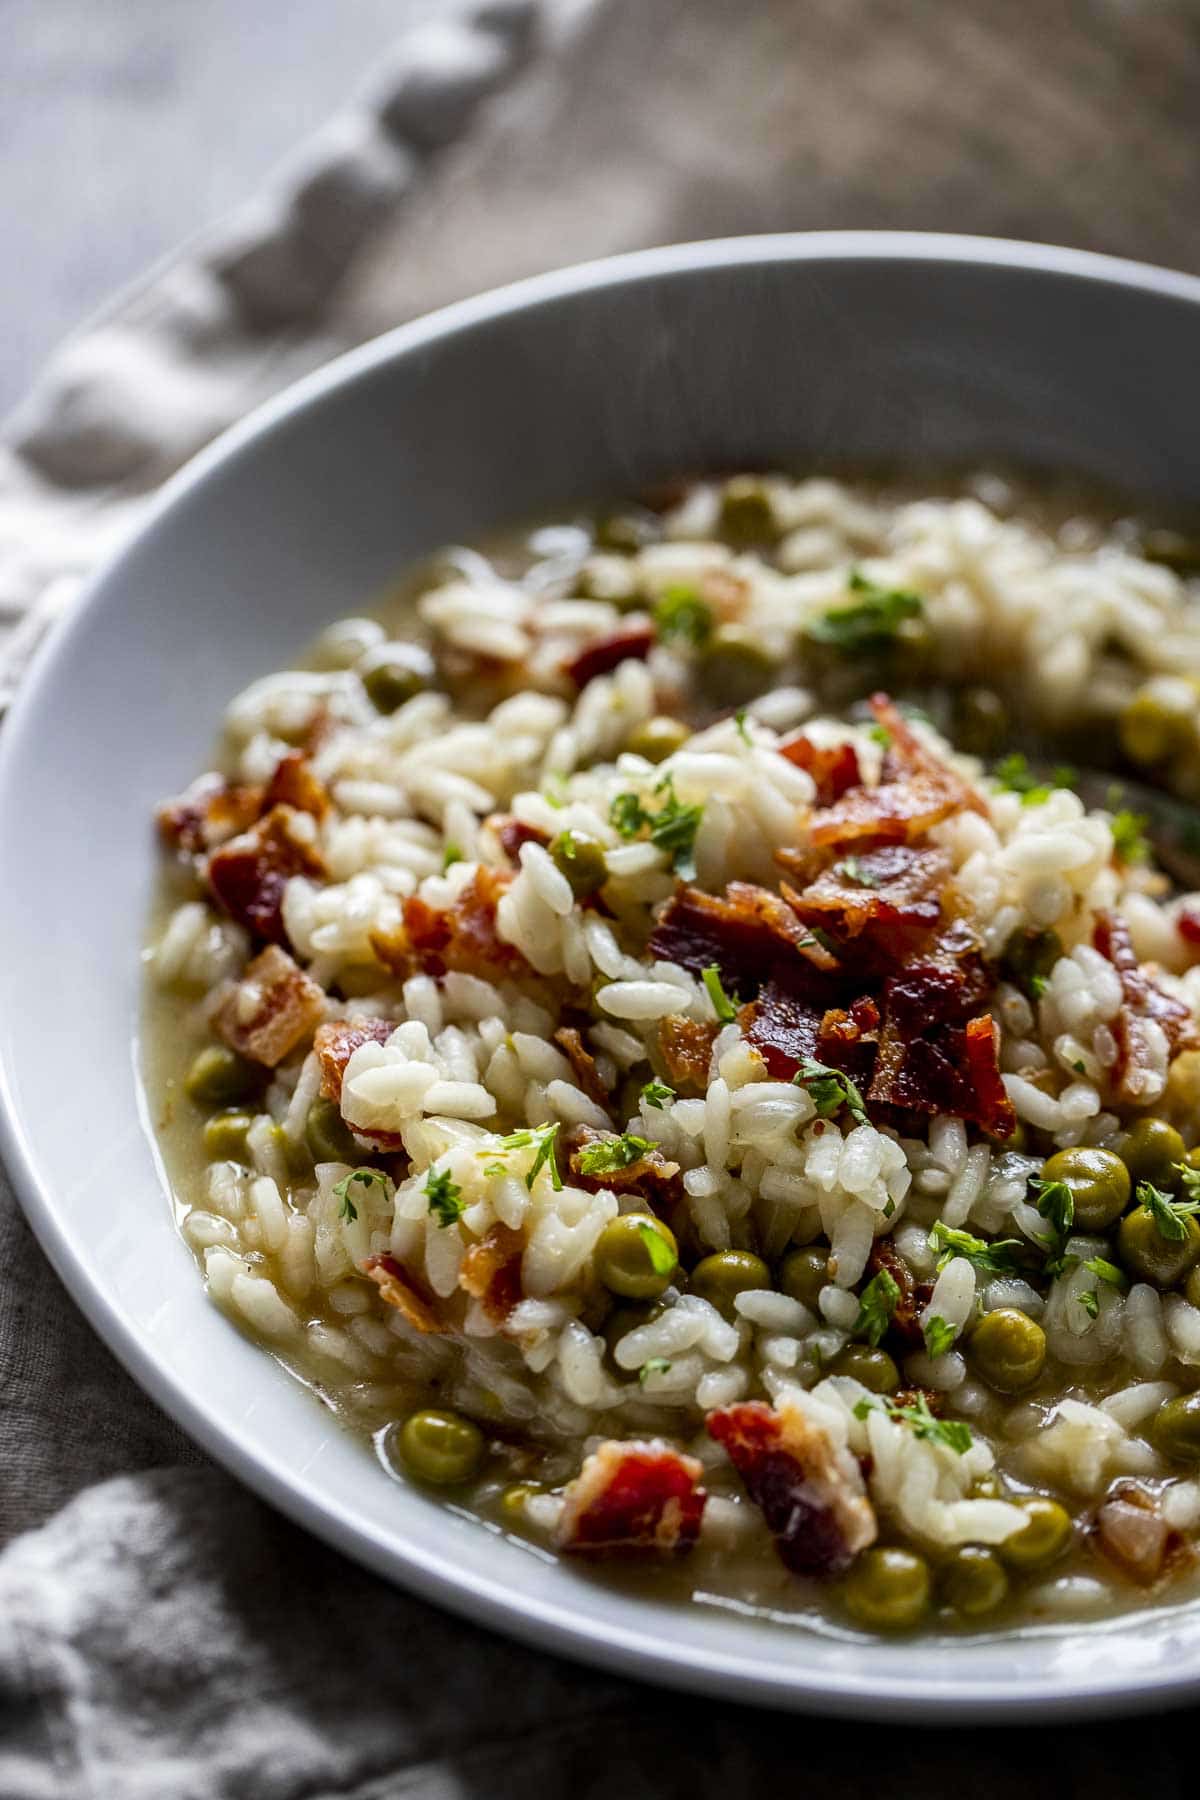 45 degree view of pea and bacon risotto in a bowl.